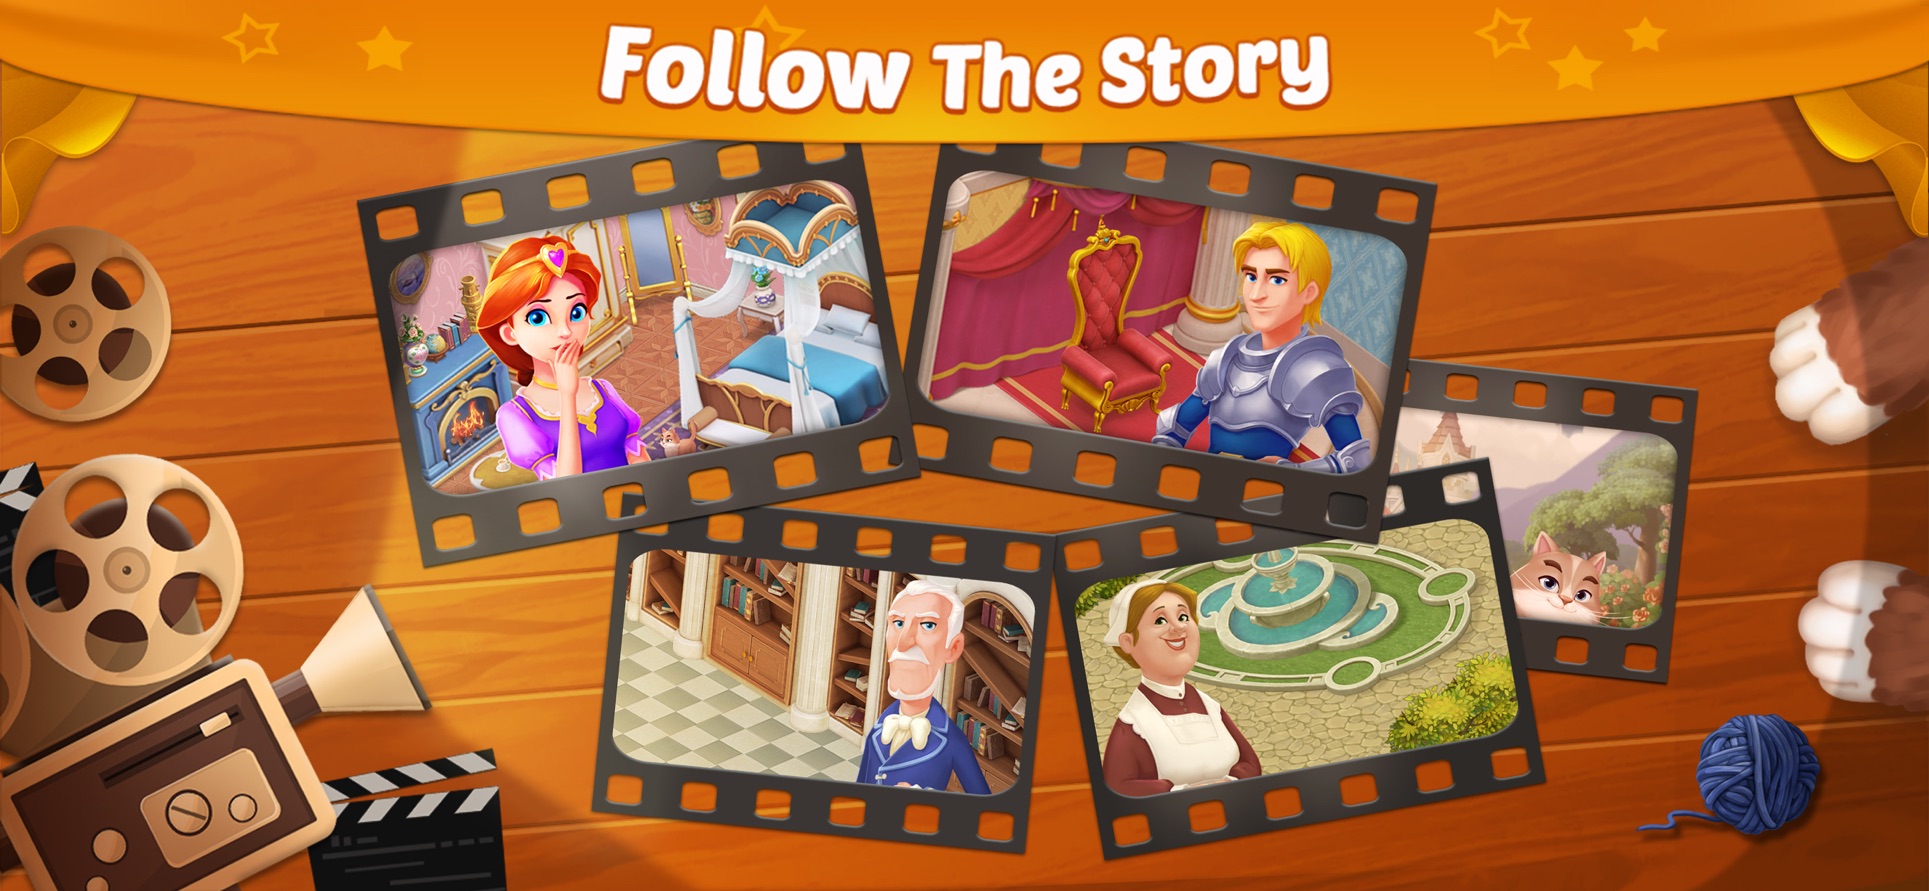 Castle story download free mac download